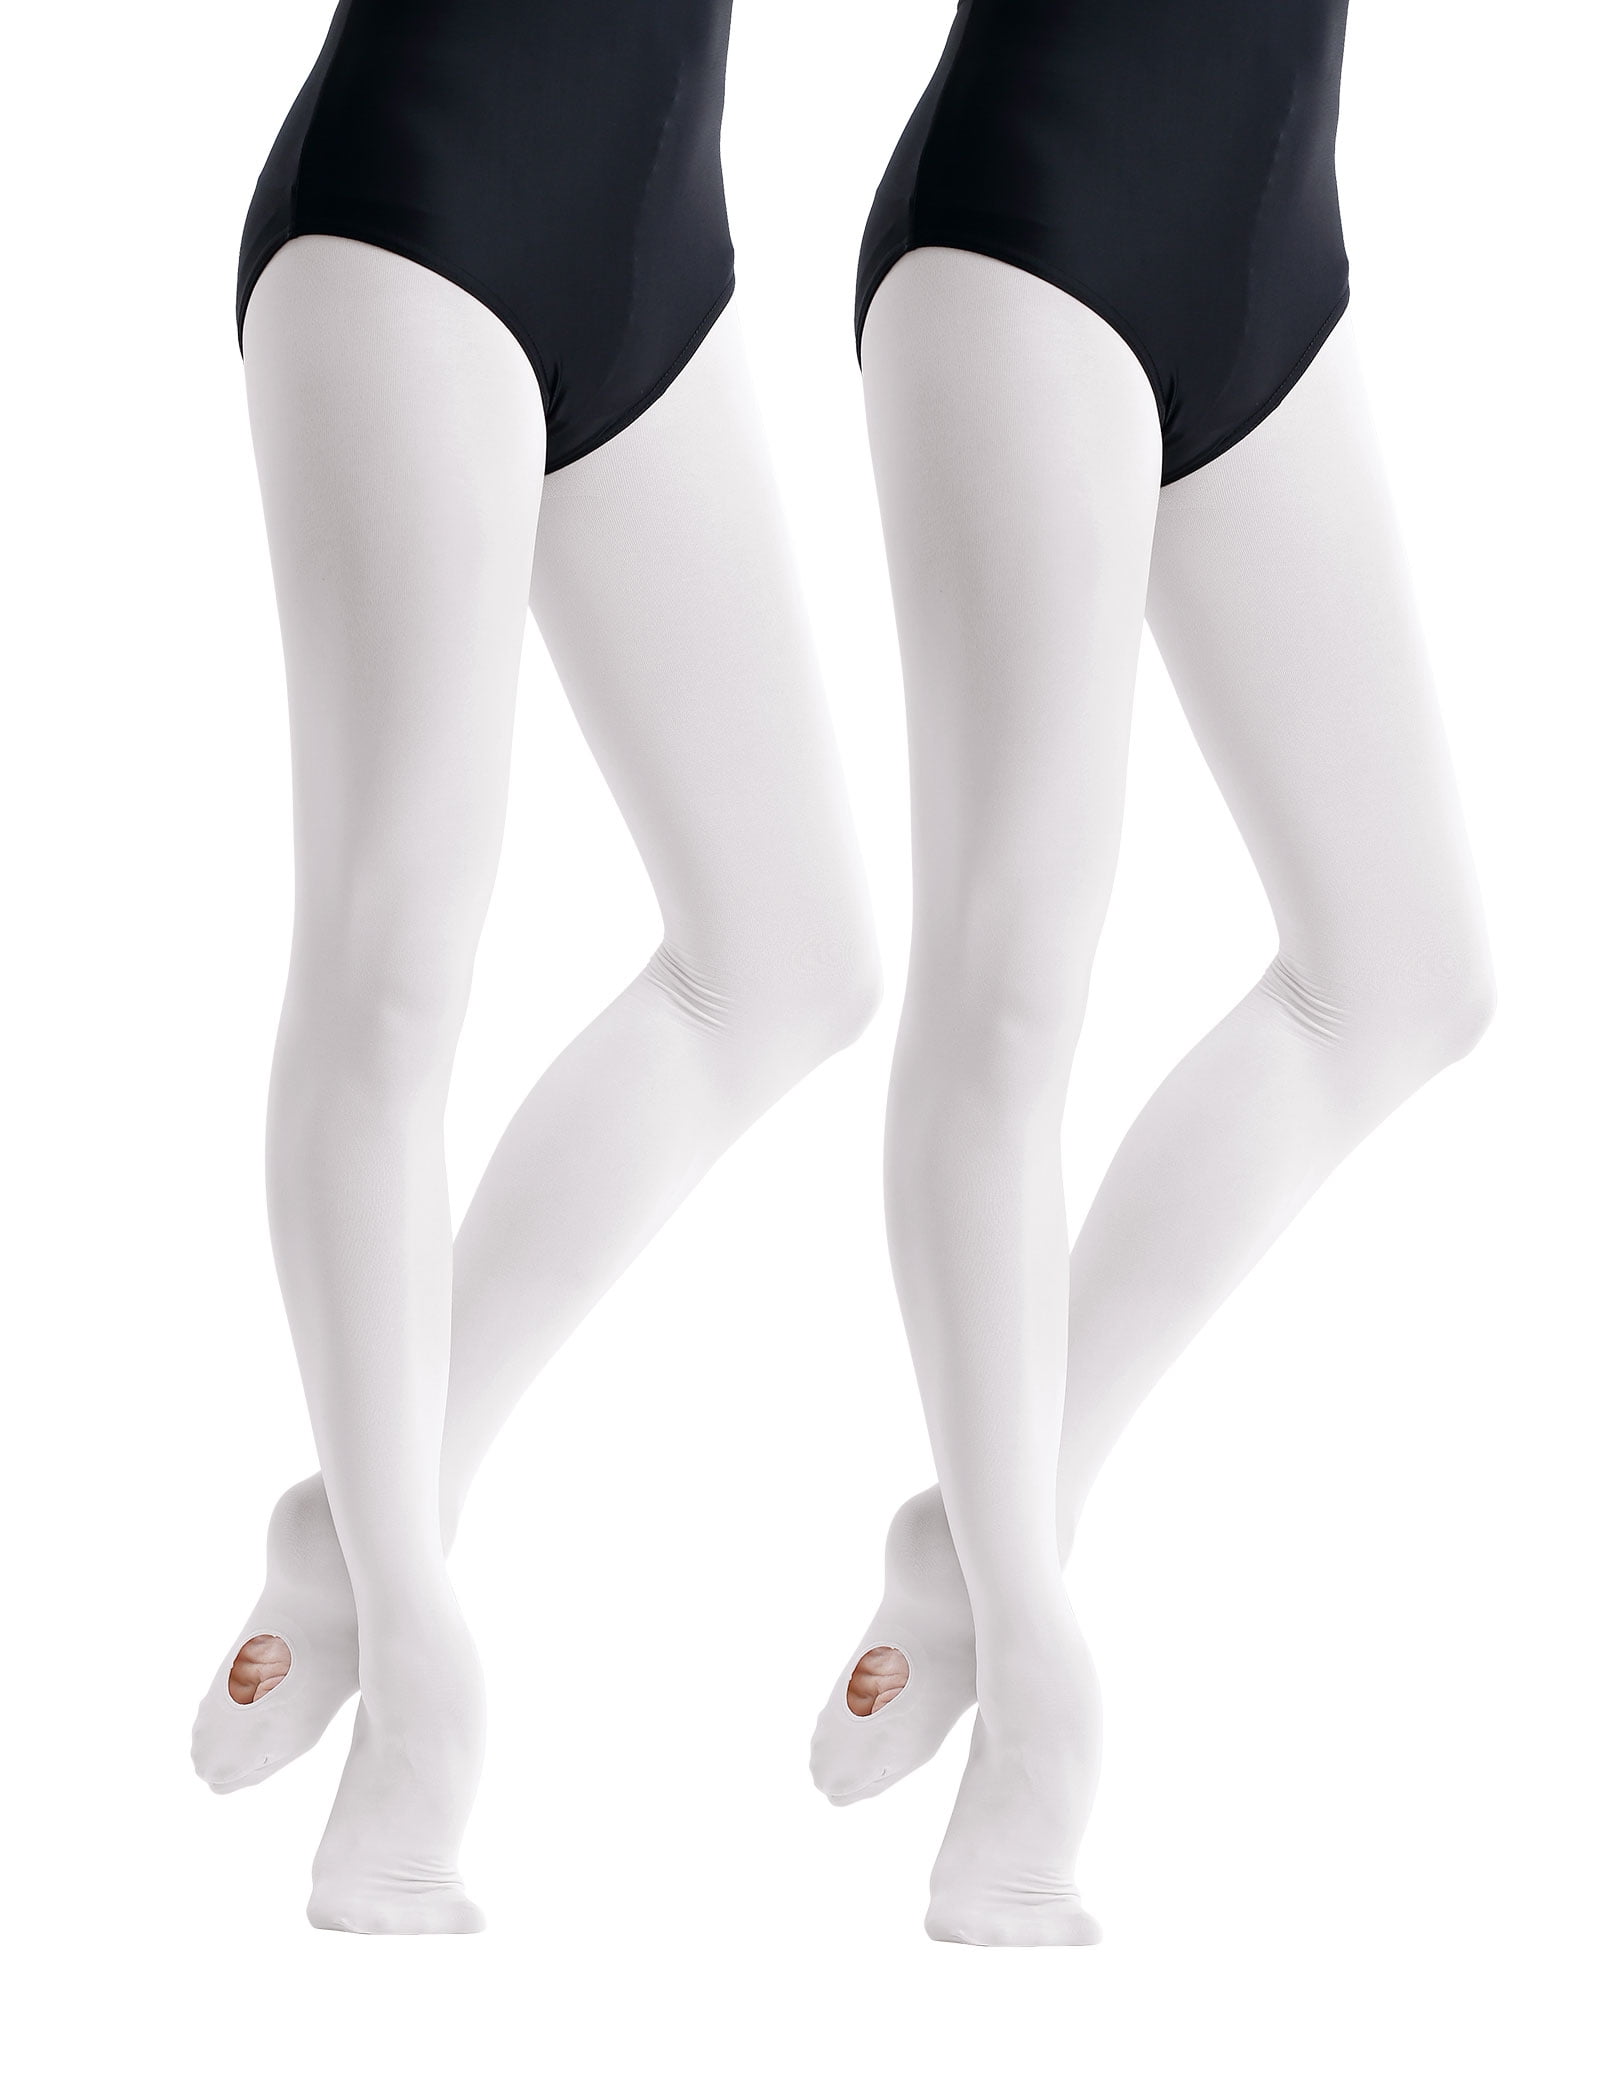 Daydance Soft Big Girl's Women Ballet Tights White Kids Semi Sheer  Transition Tights for Dance 60D